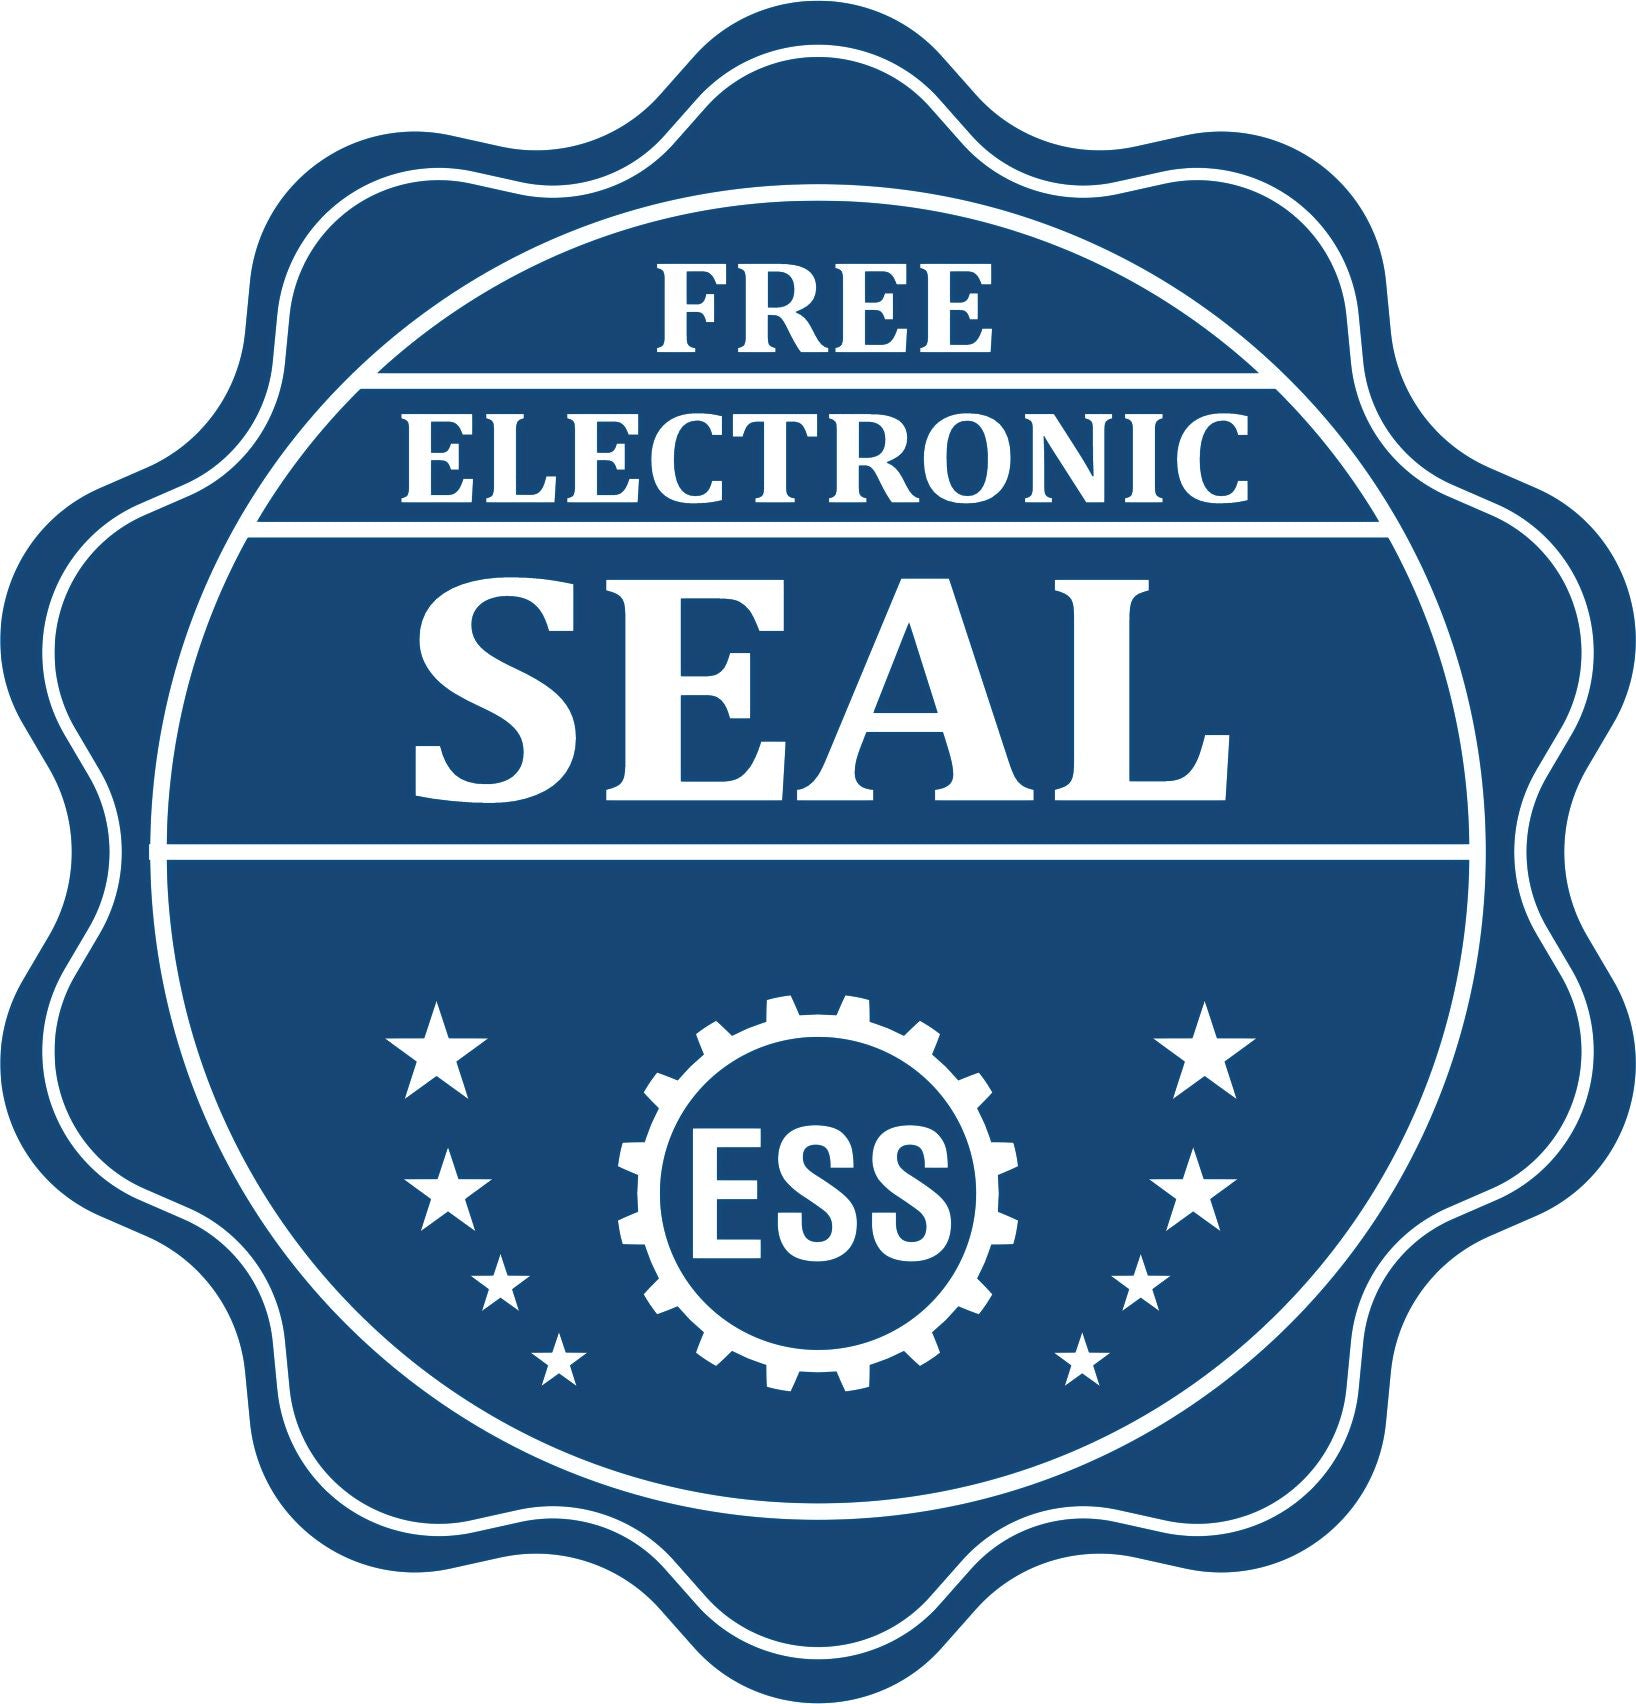 A badge showing a free electronic seal for the Michigan Engineer Desk Seal with stars and the ESS gear on the emblem.